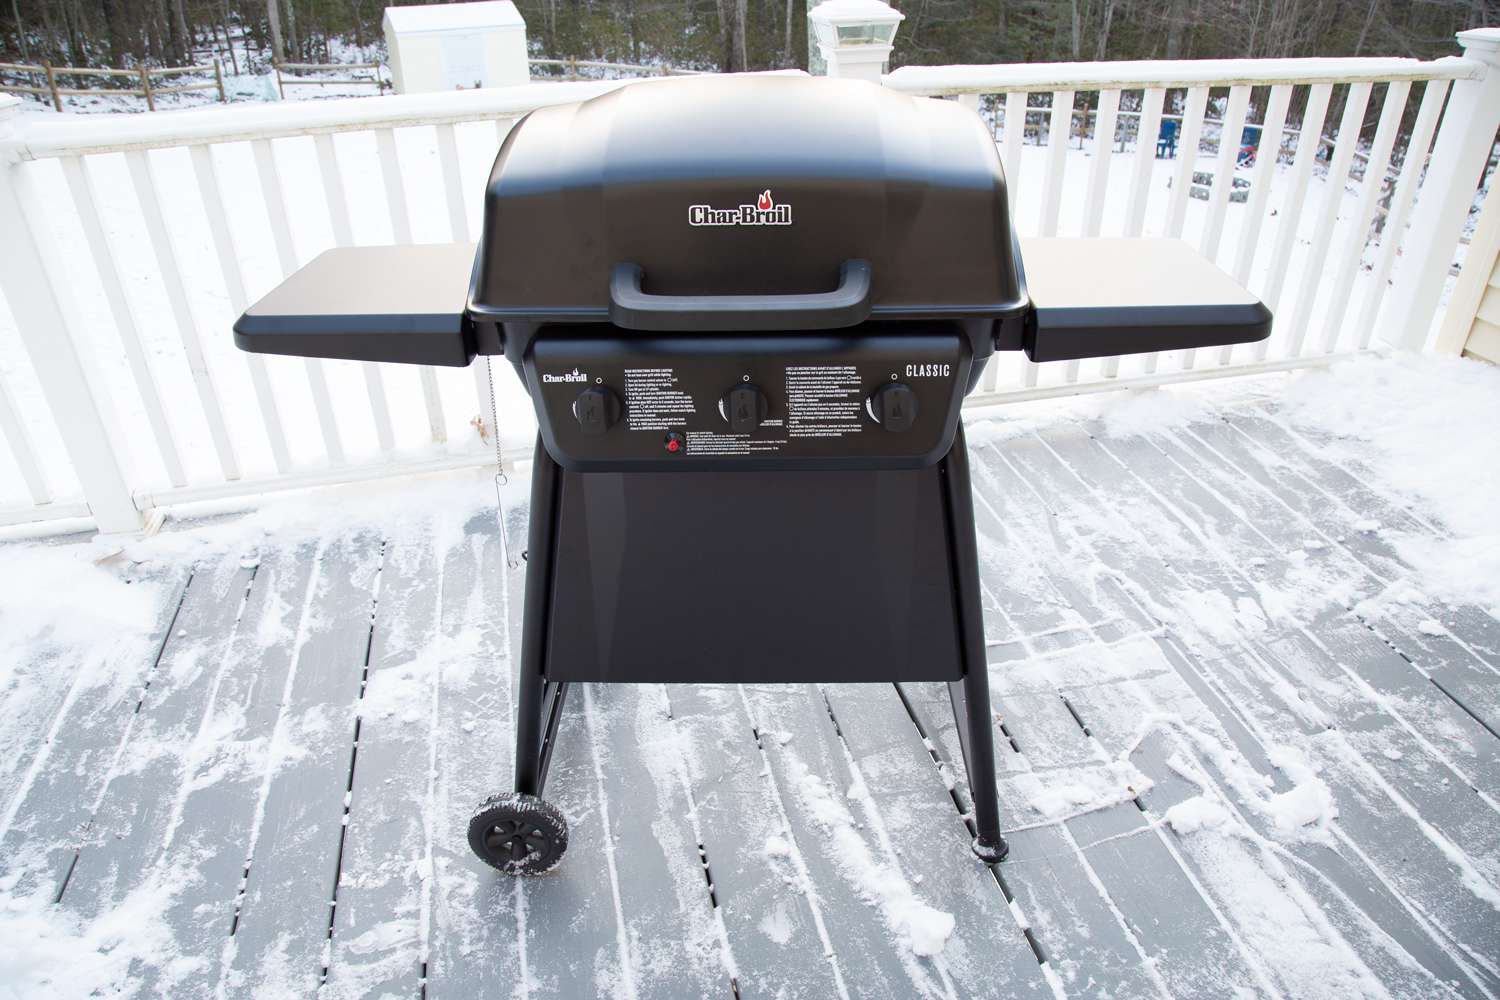 char-broil-classic-360-3-burner-gas-grill on a snowy patio